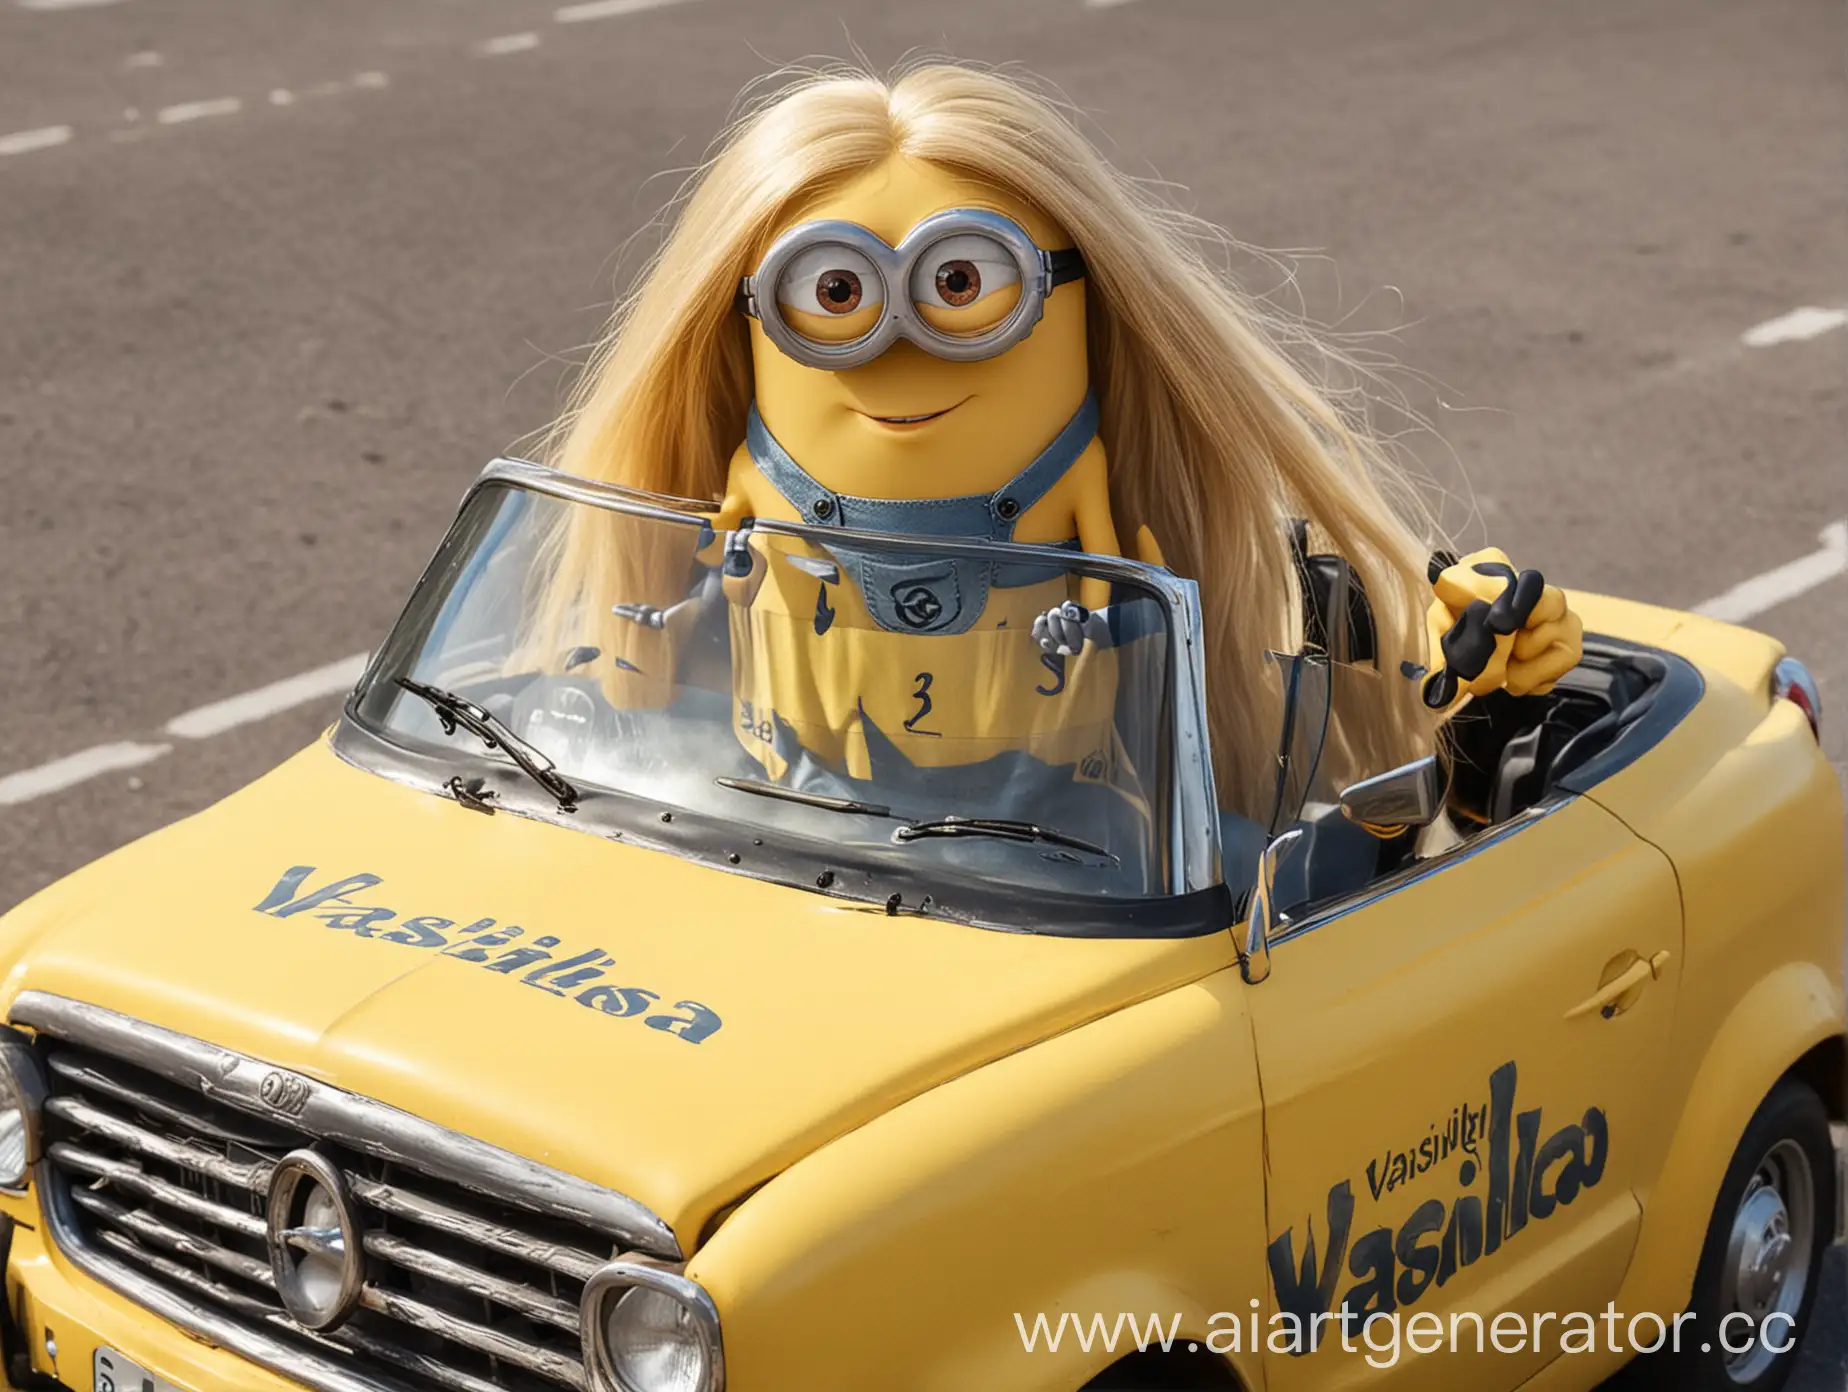 a minion with long blond hair sits on the hood of a yellow car with the name Vasilisa clearly written on it